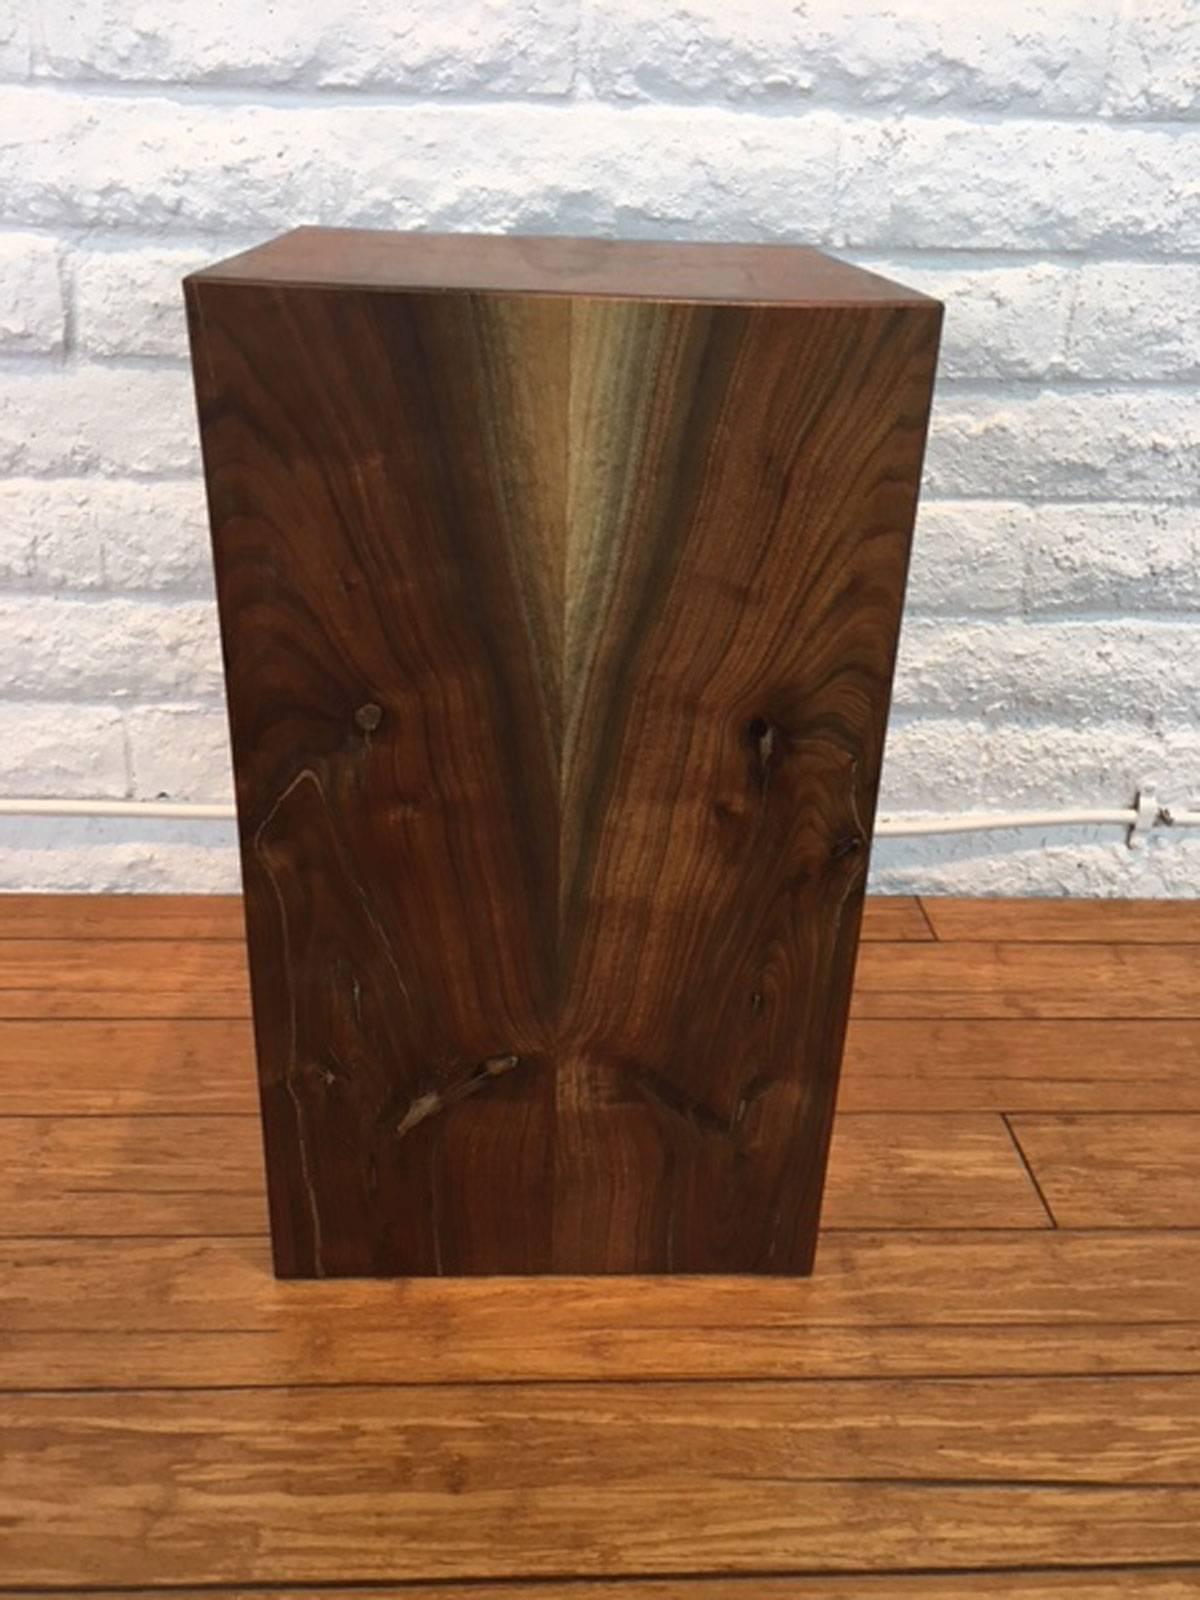 Walnut Side Table or Pedestal In Excellent Condition For Sale In Phoenix, AZ